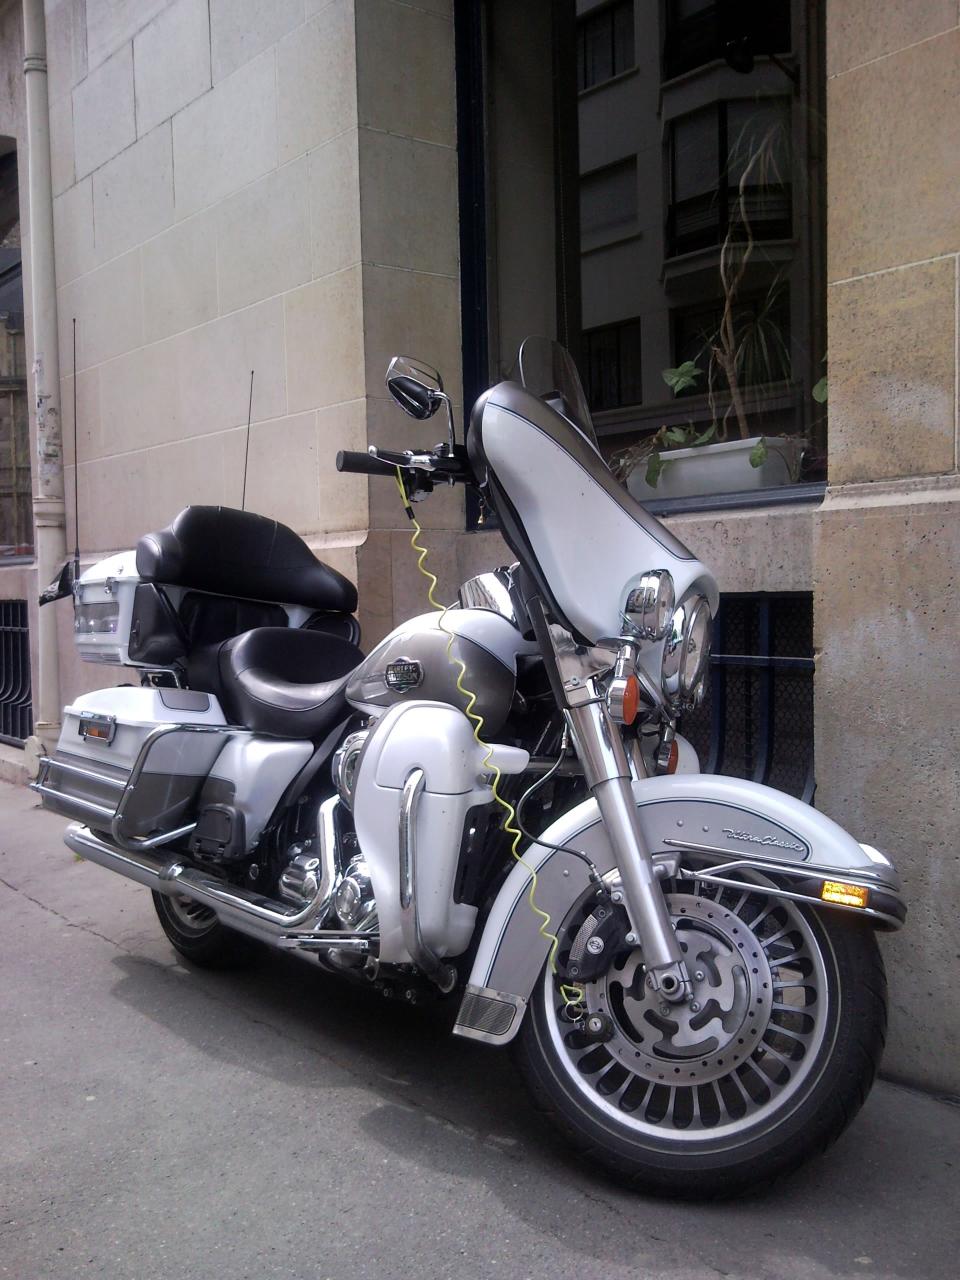 Harley Davidson Motorcycles -Style Your Ride - The WoW Style